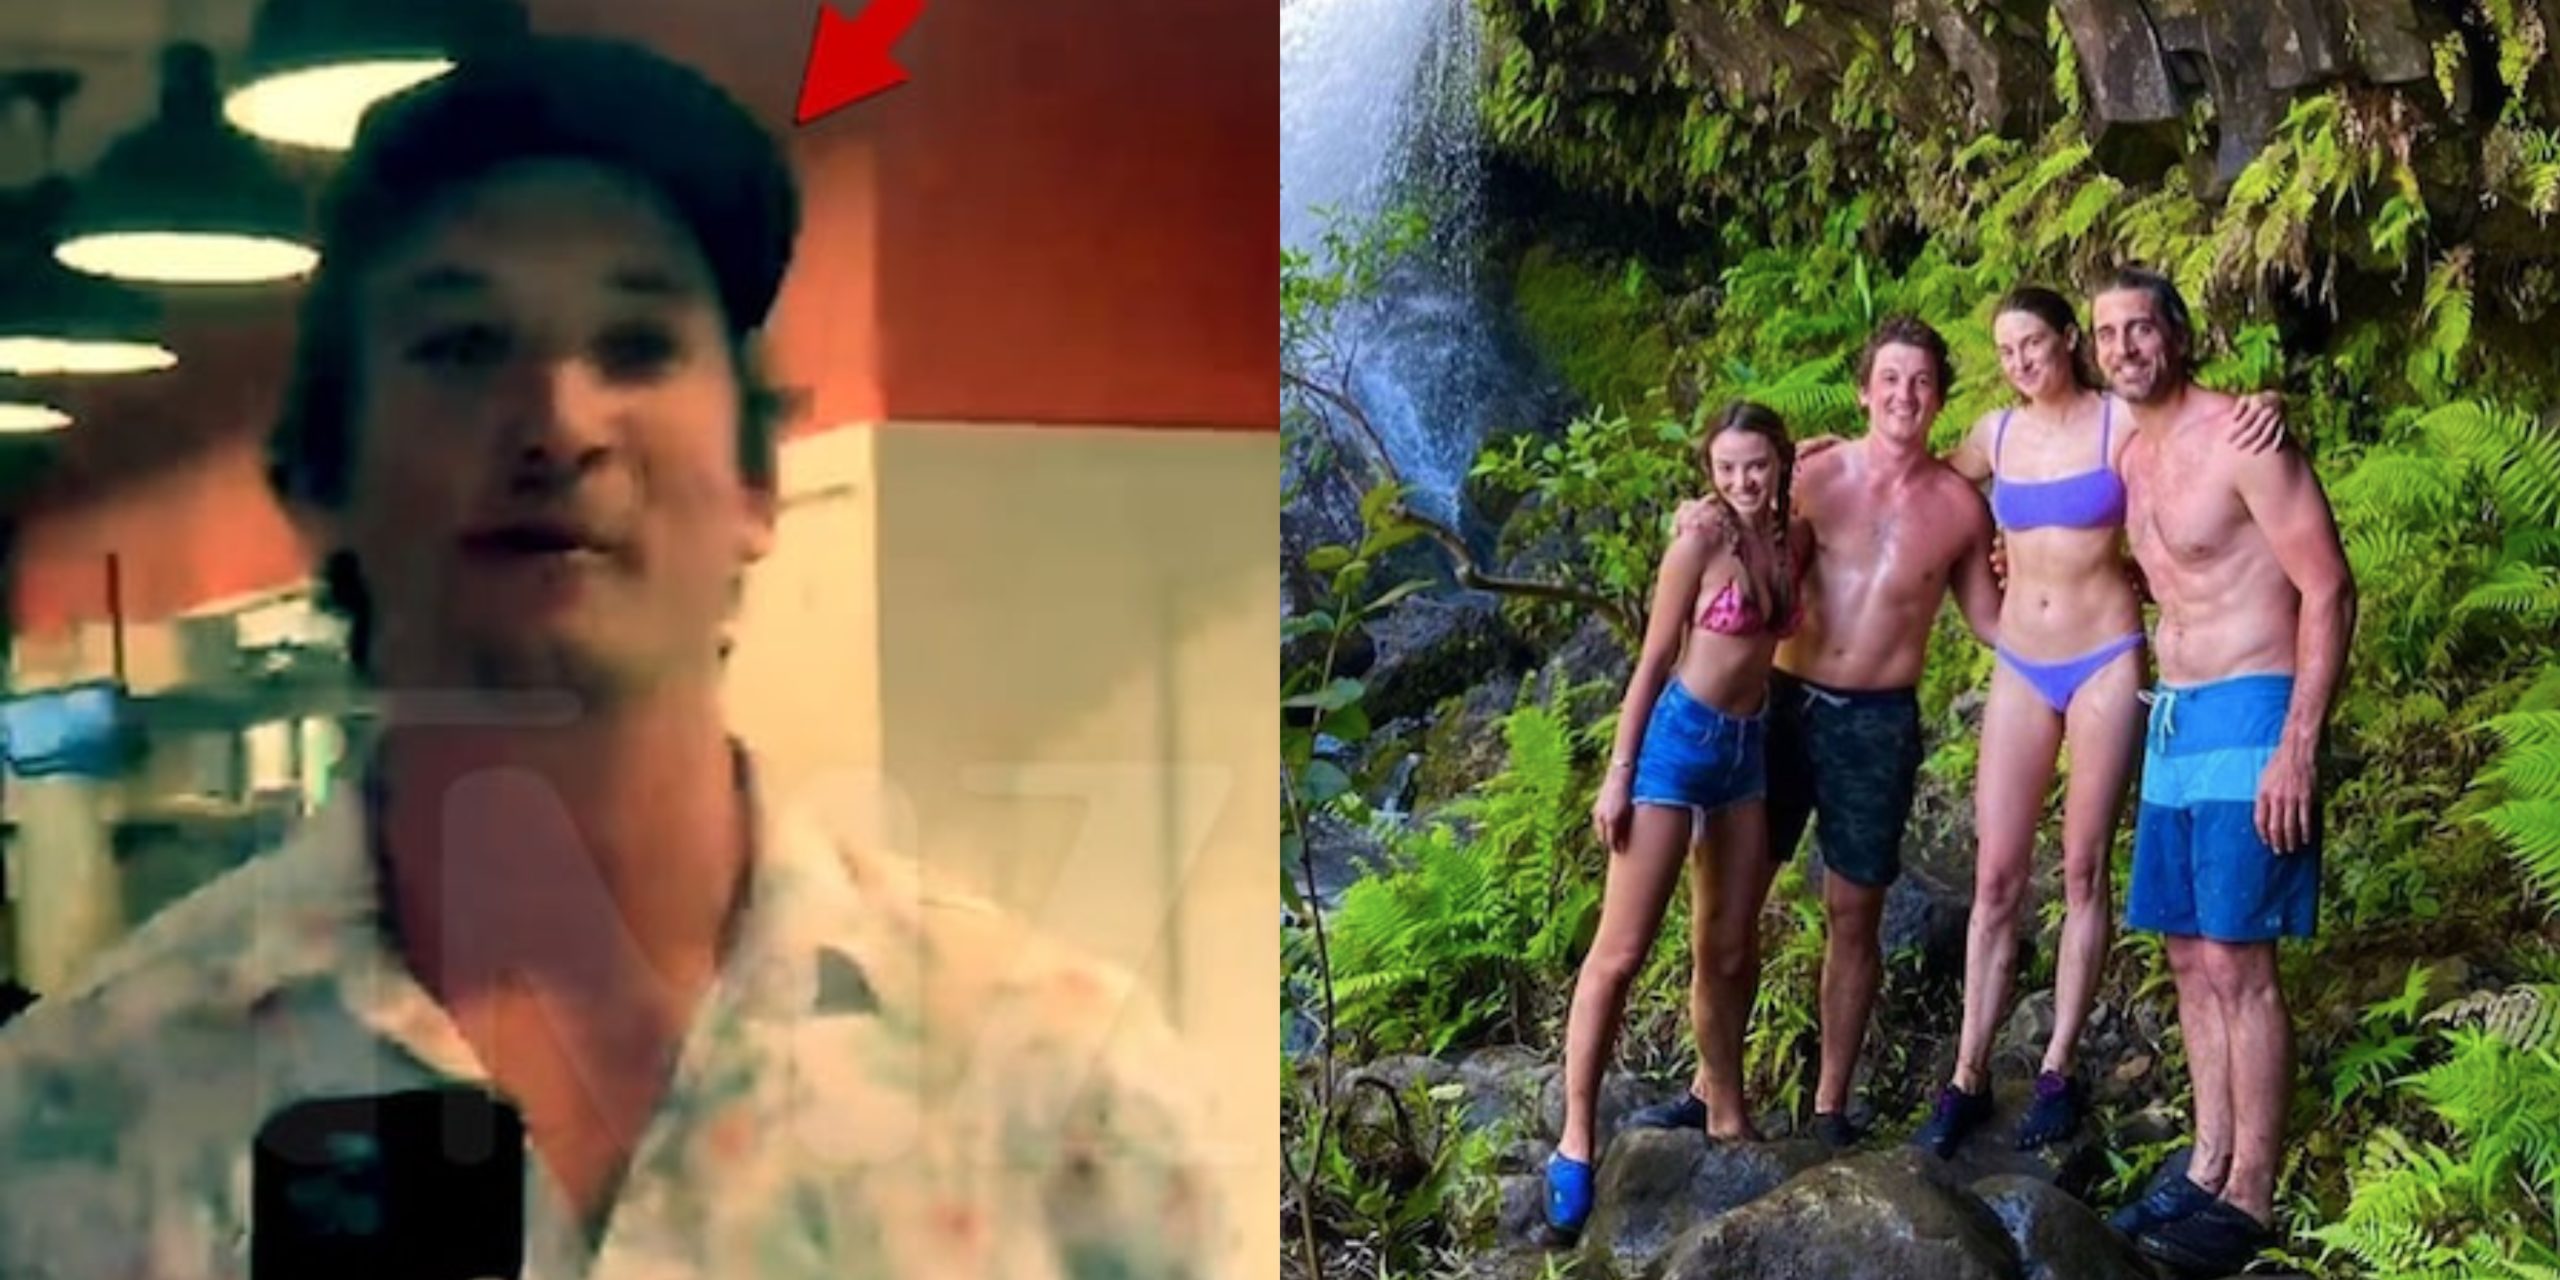 Footage Surfaces Showing Aftermath Of Miles Teller Being Punched In The Face While On Vacation With Aaron Rodgers Shailene Woodley Video Total Pro Sports